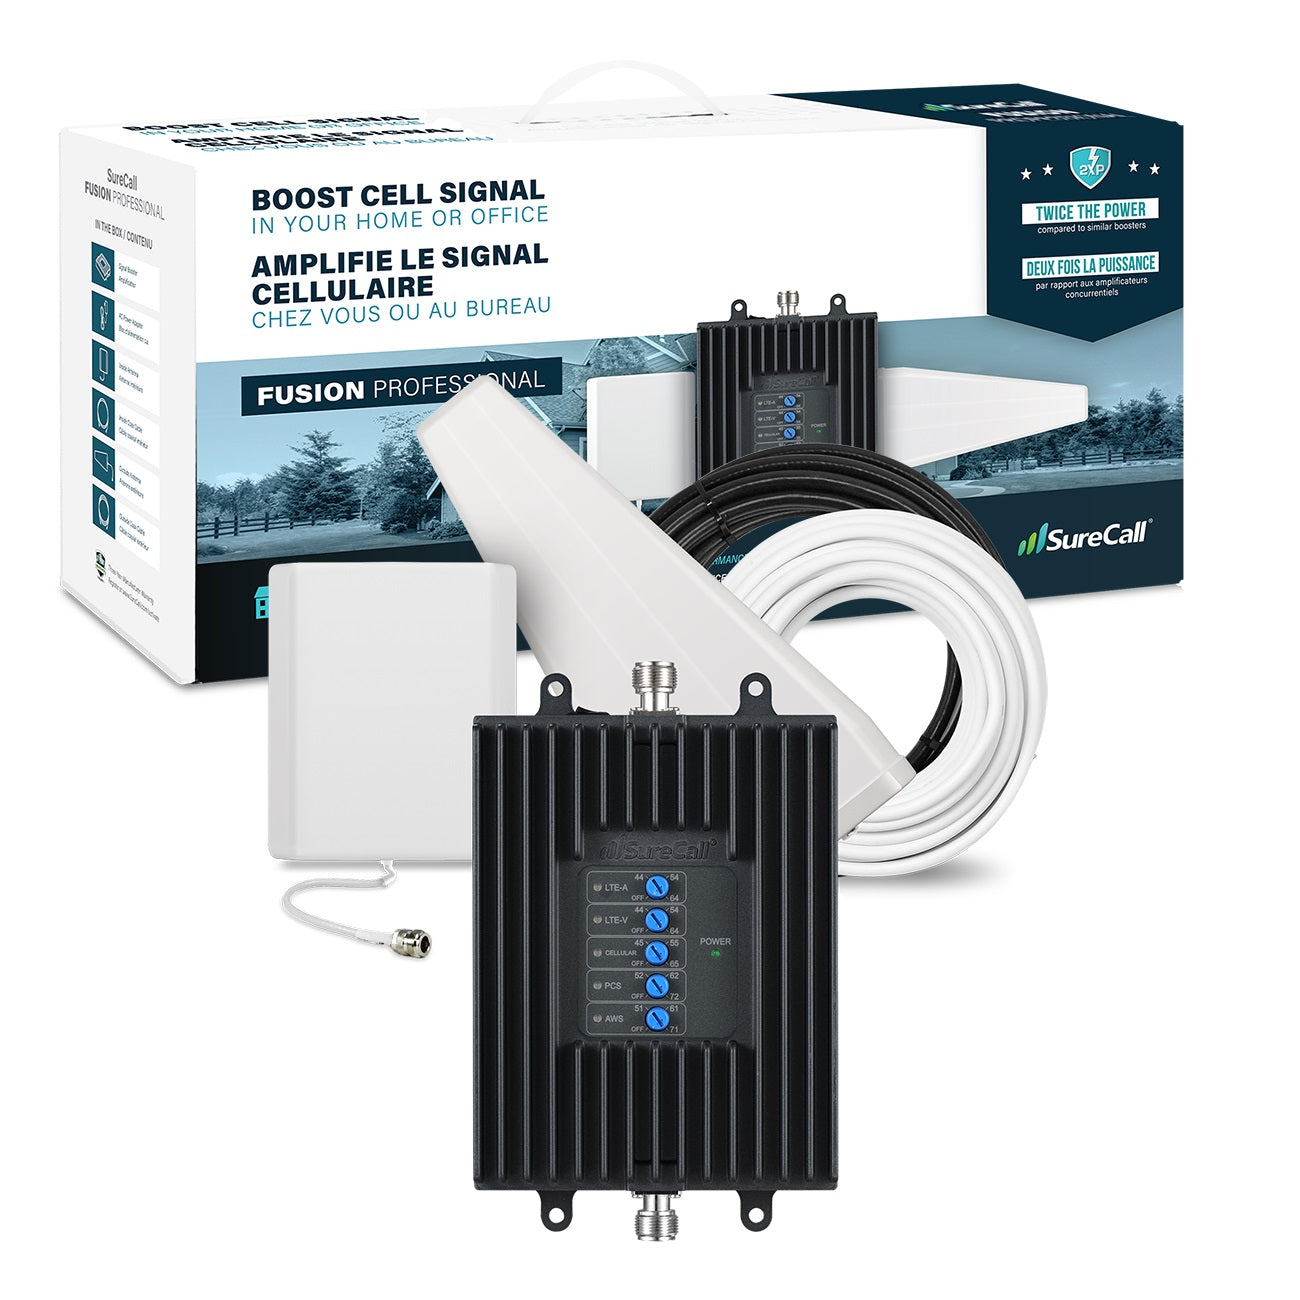 SureCall Fusion Professional Cell Signal Booster Kit for Home/Office | Up to 8,000 sq ft | All Canadian Carriers 4G/5G - Bell, Rogers, Telus | ISED Approved